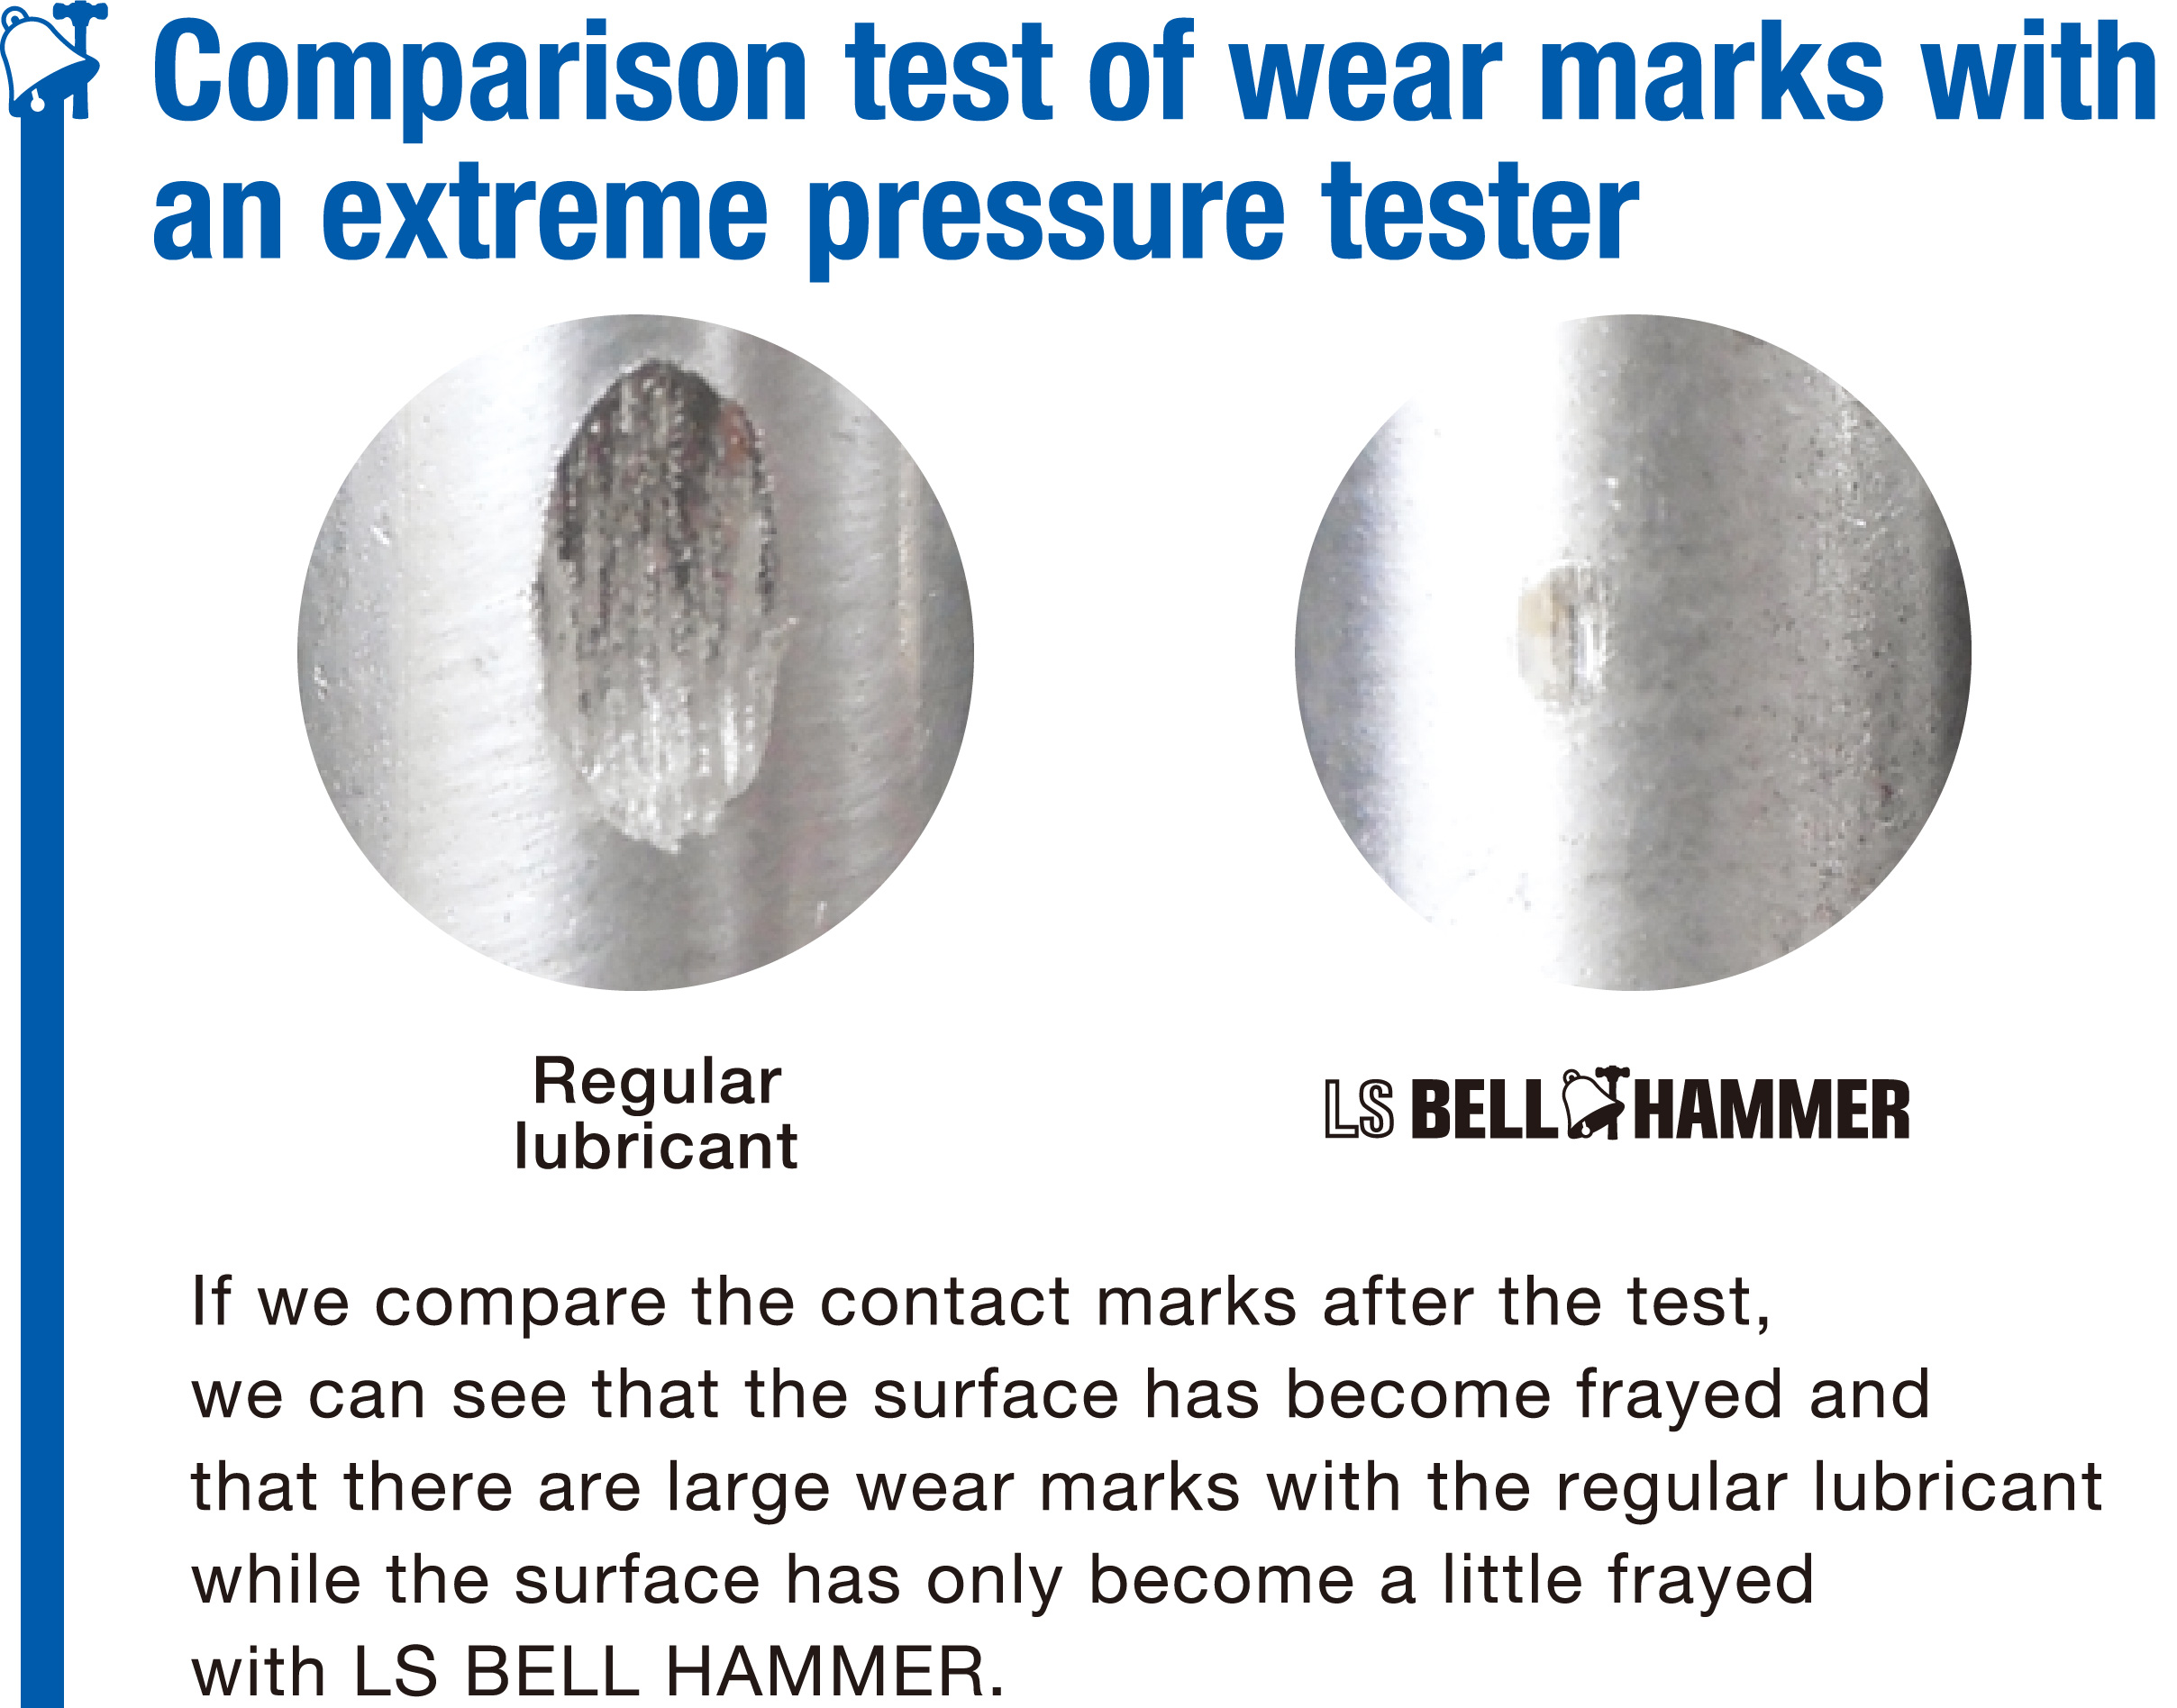 Comparison test of wear marks with an extreme pressure tester